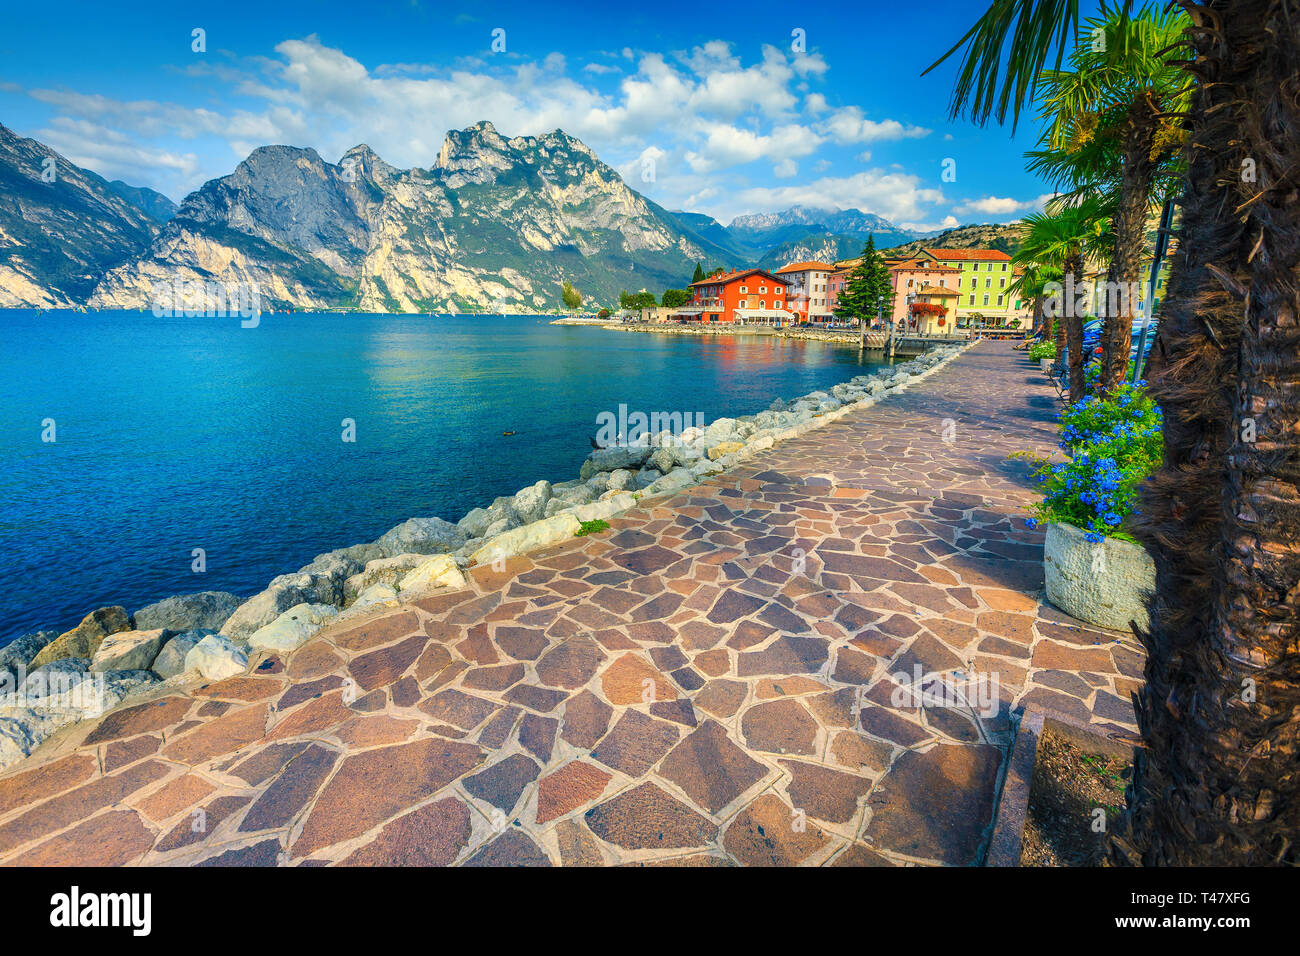 Fantastic promenade decorated with colorful mediterranean flowers. Amazing landscape with high mountains and lake Garda, Torbole, Italy, Europe Stock Photo